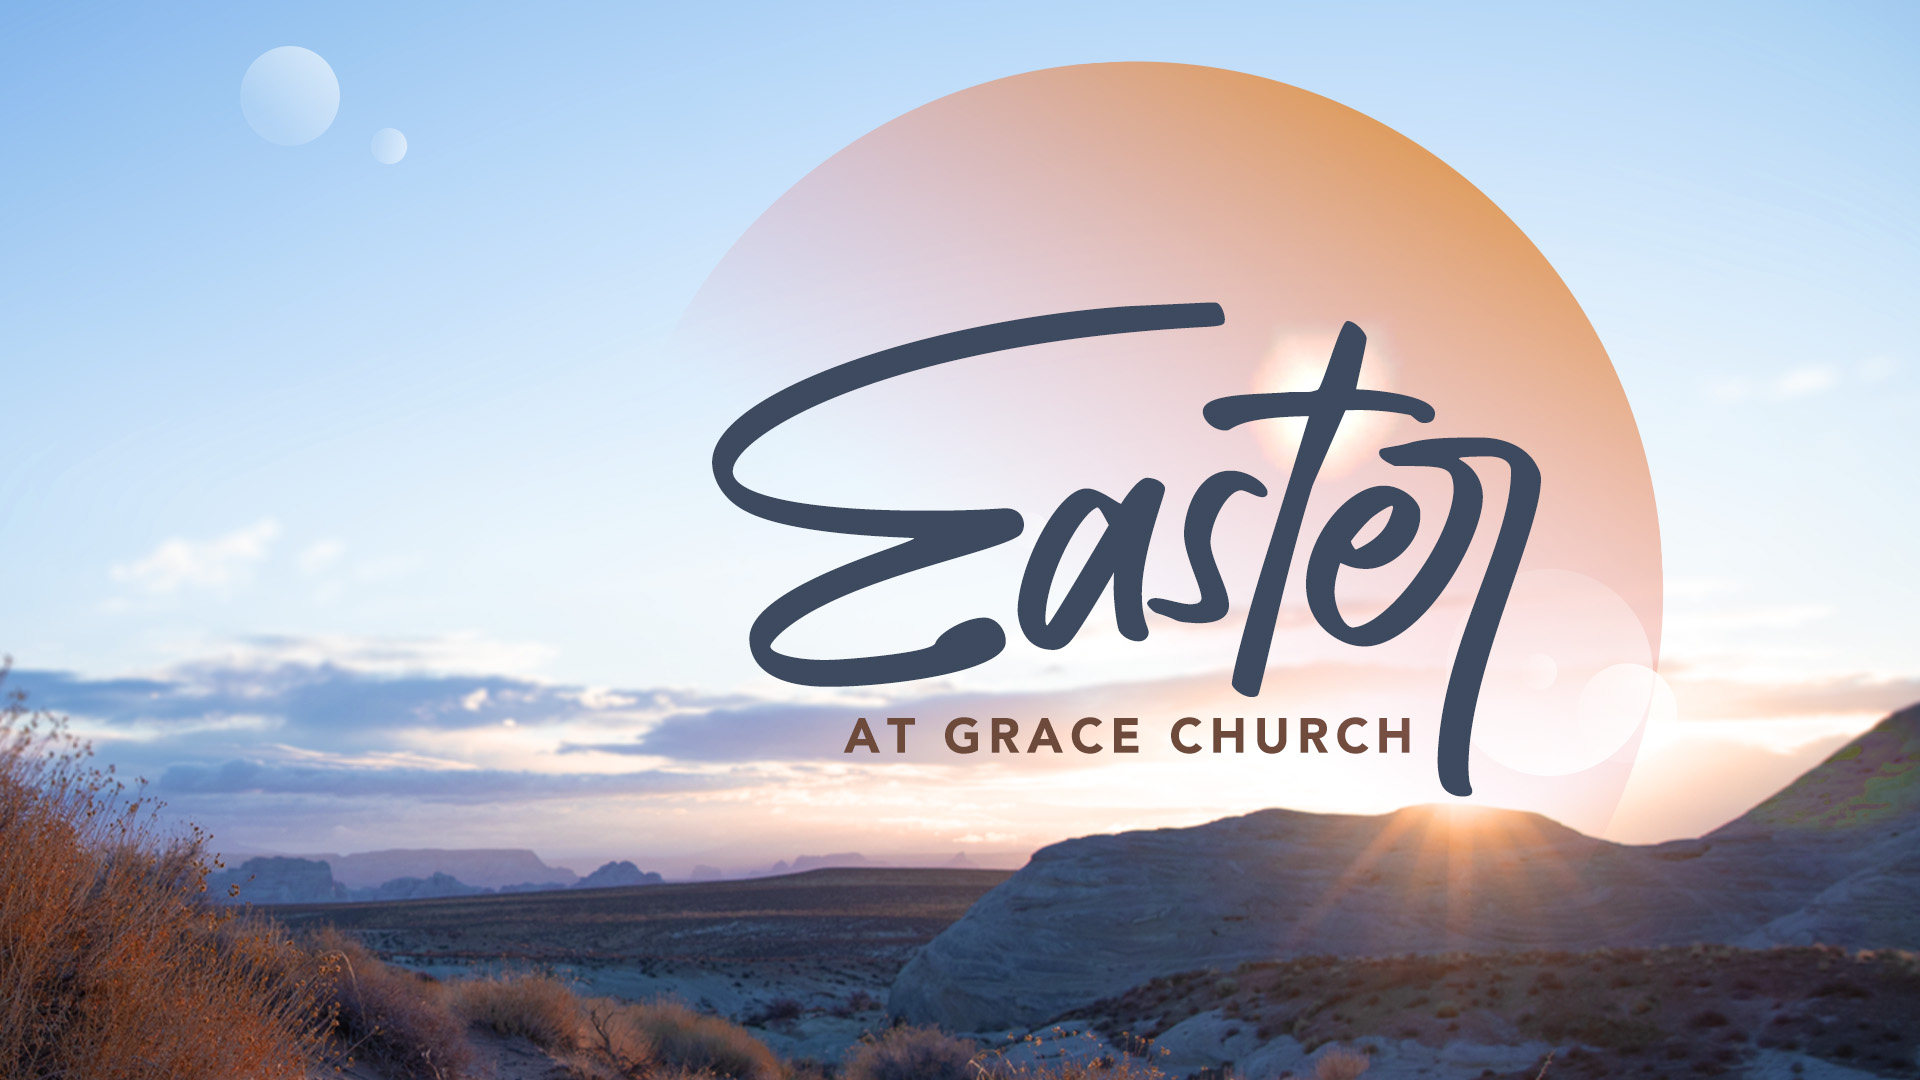 Easter Weekend

April 7 || 6:00pm
April 8 || 3:00 and 5:00pm
April 9 || 9:00am and 11:00am
